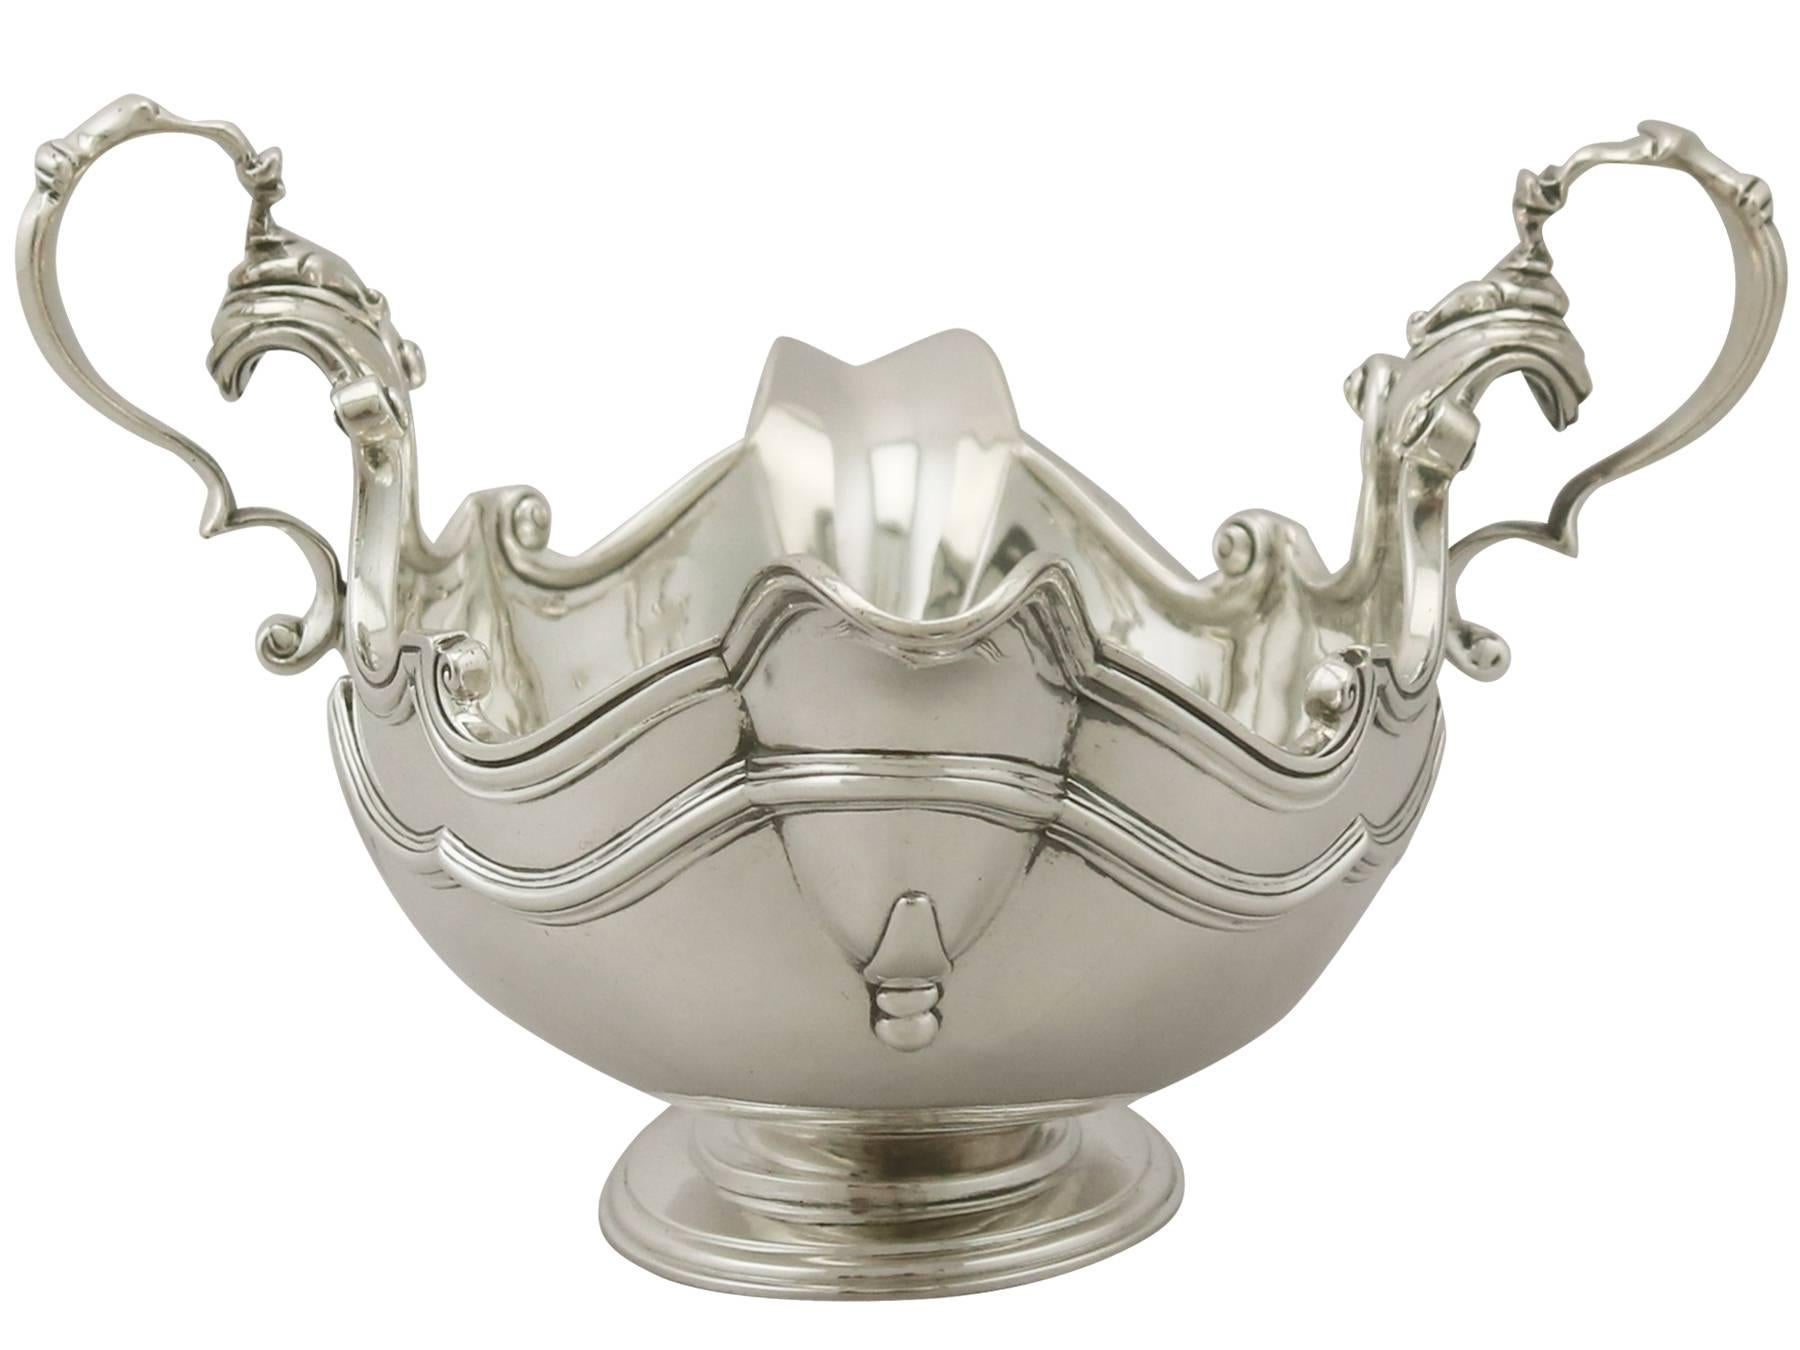 Early 20th Century Antique Edwardian Pair of Britannia Standard Silver Sauceboats, 1908